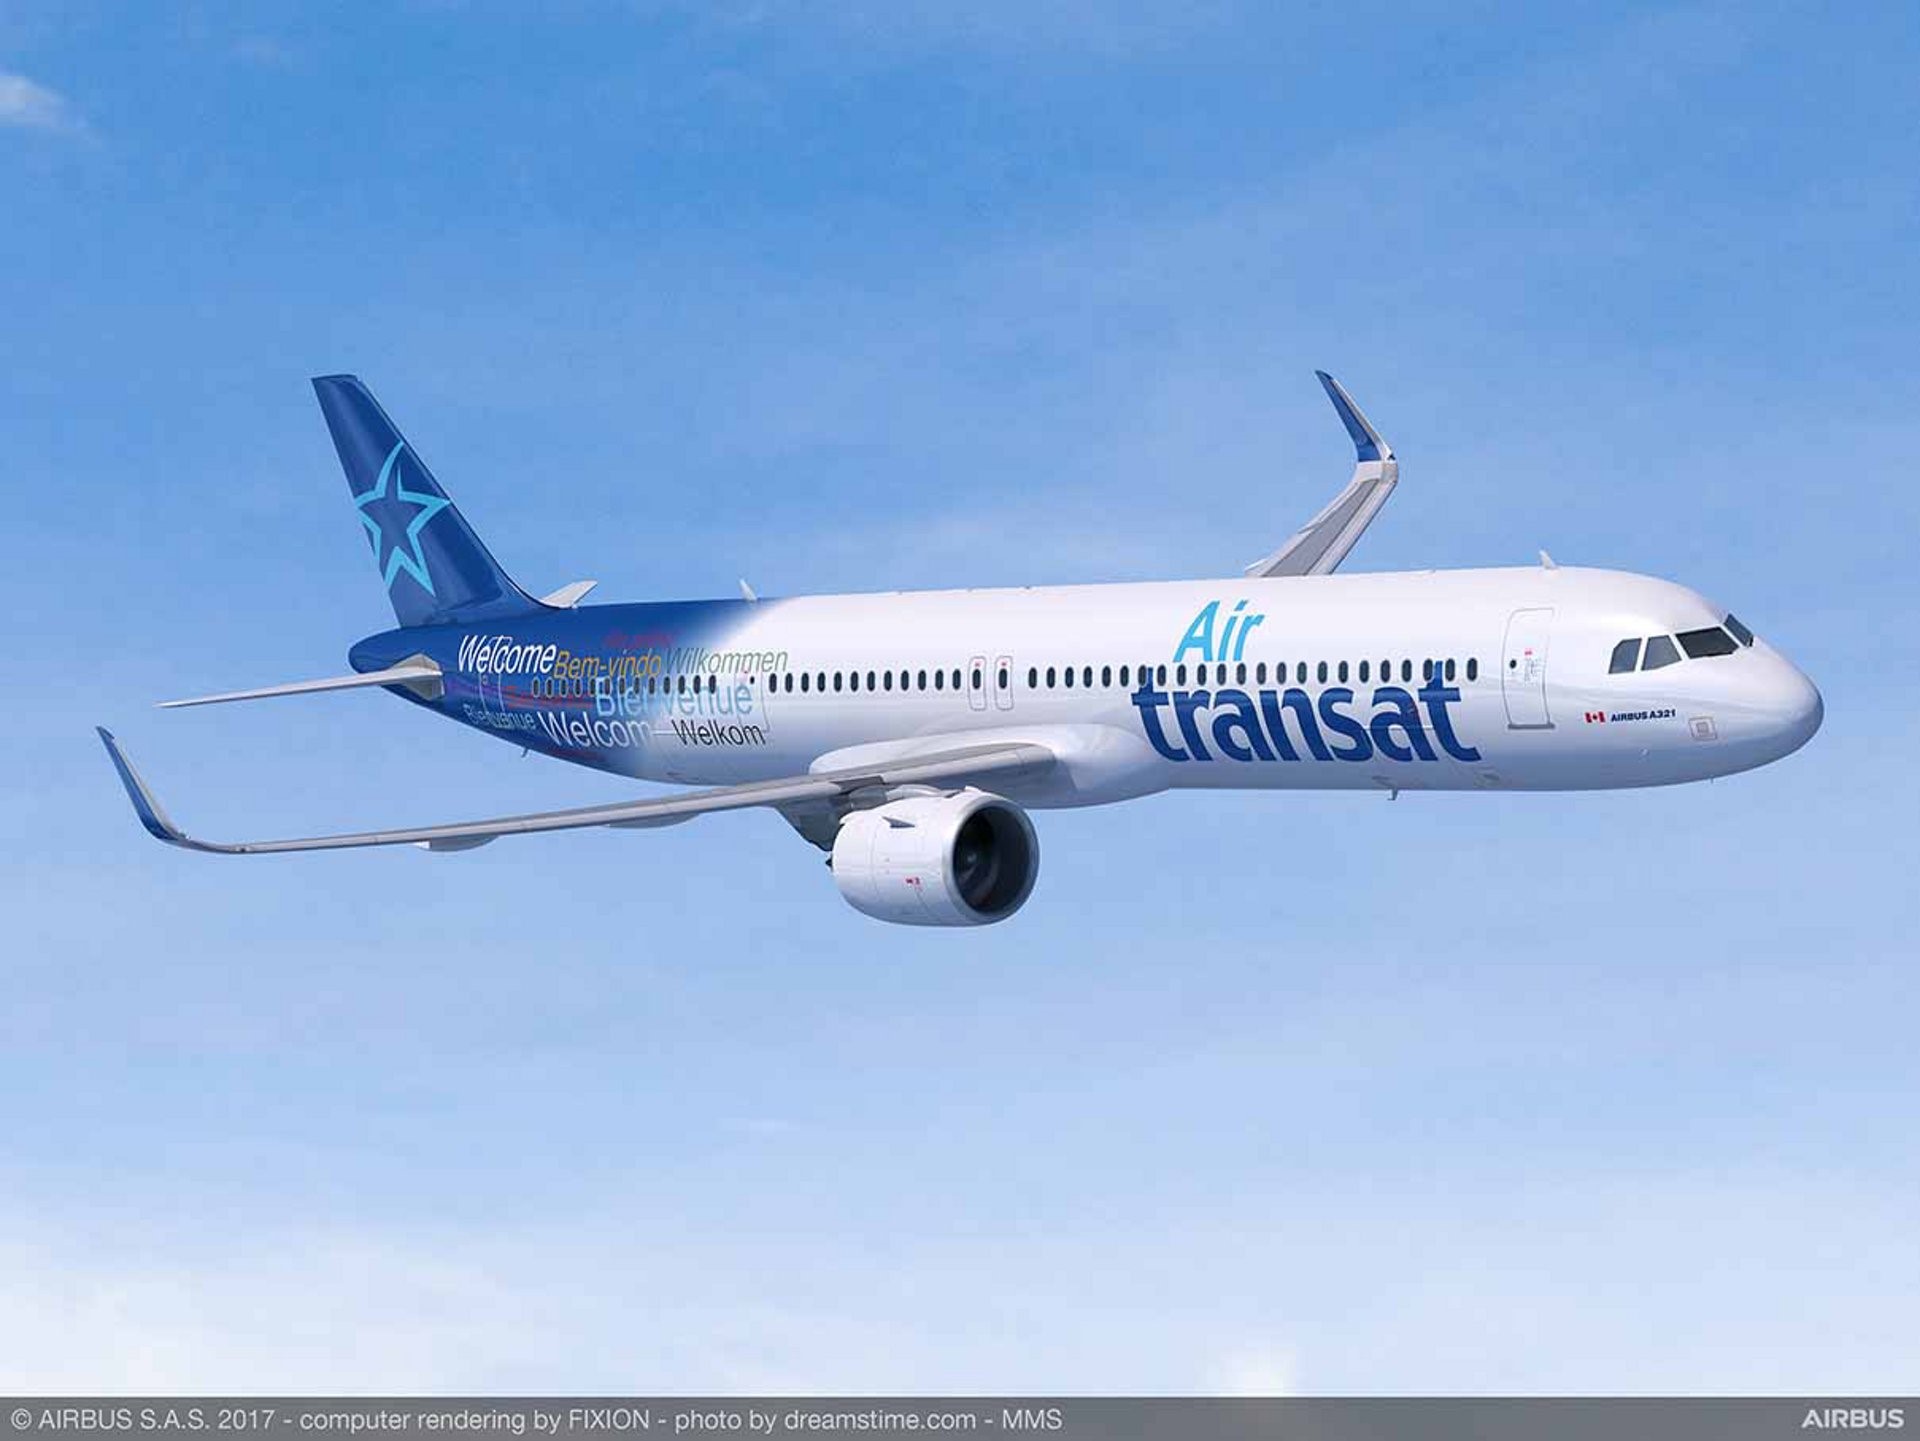 republic-of-media-take-flight-with-air-transat-in-uk-first-campaign-republic-of-media